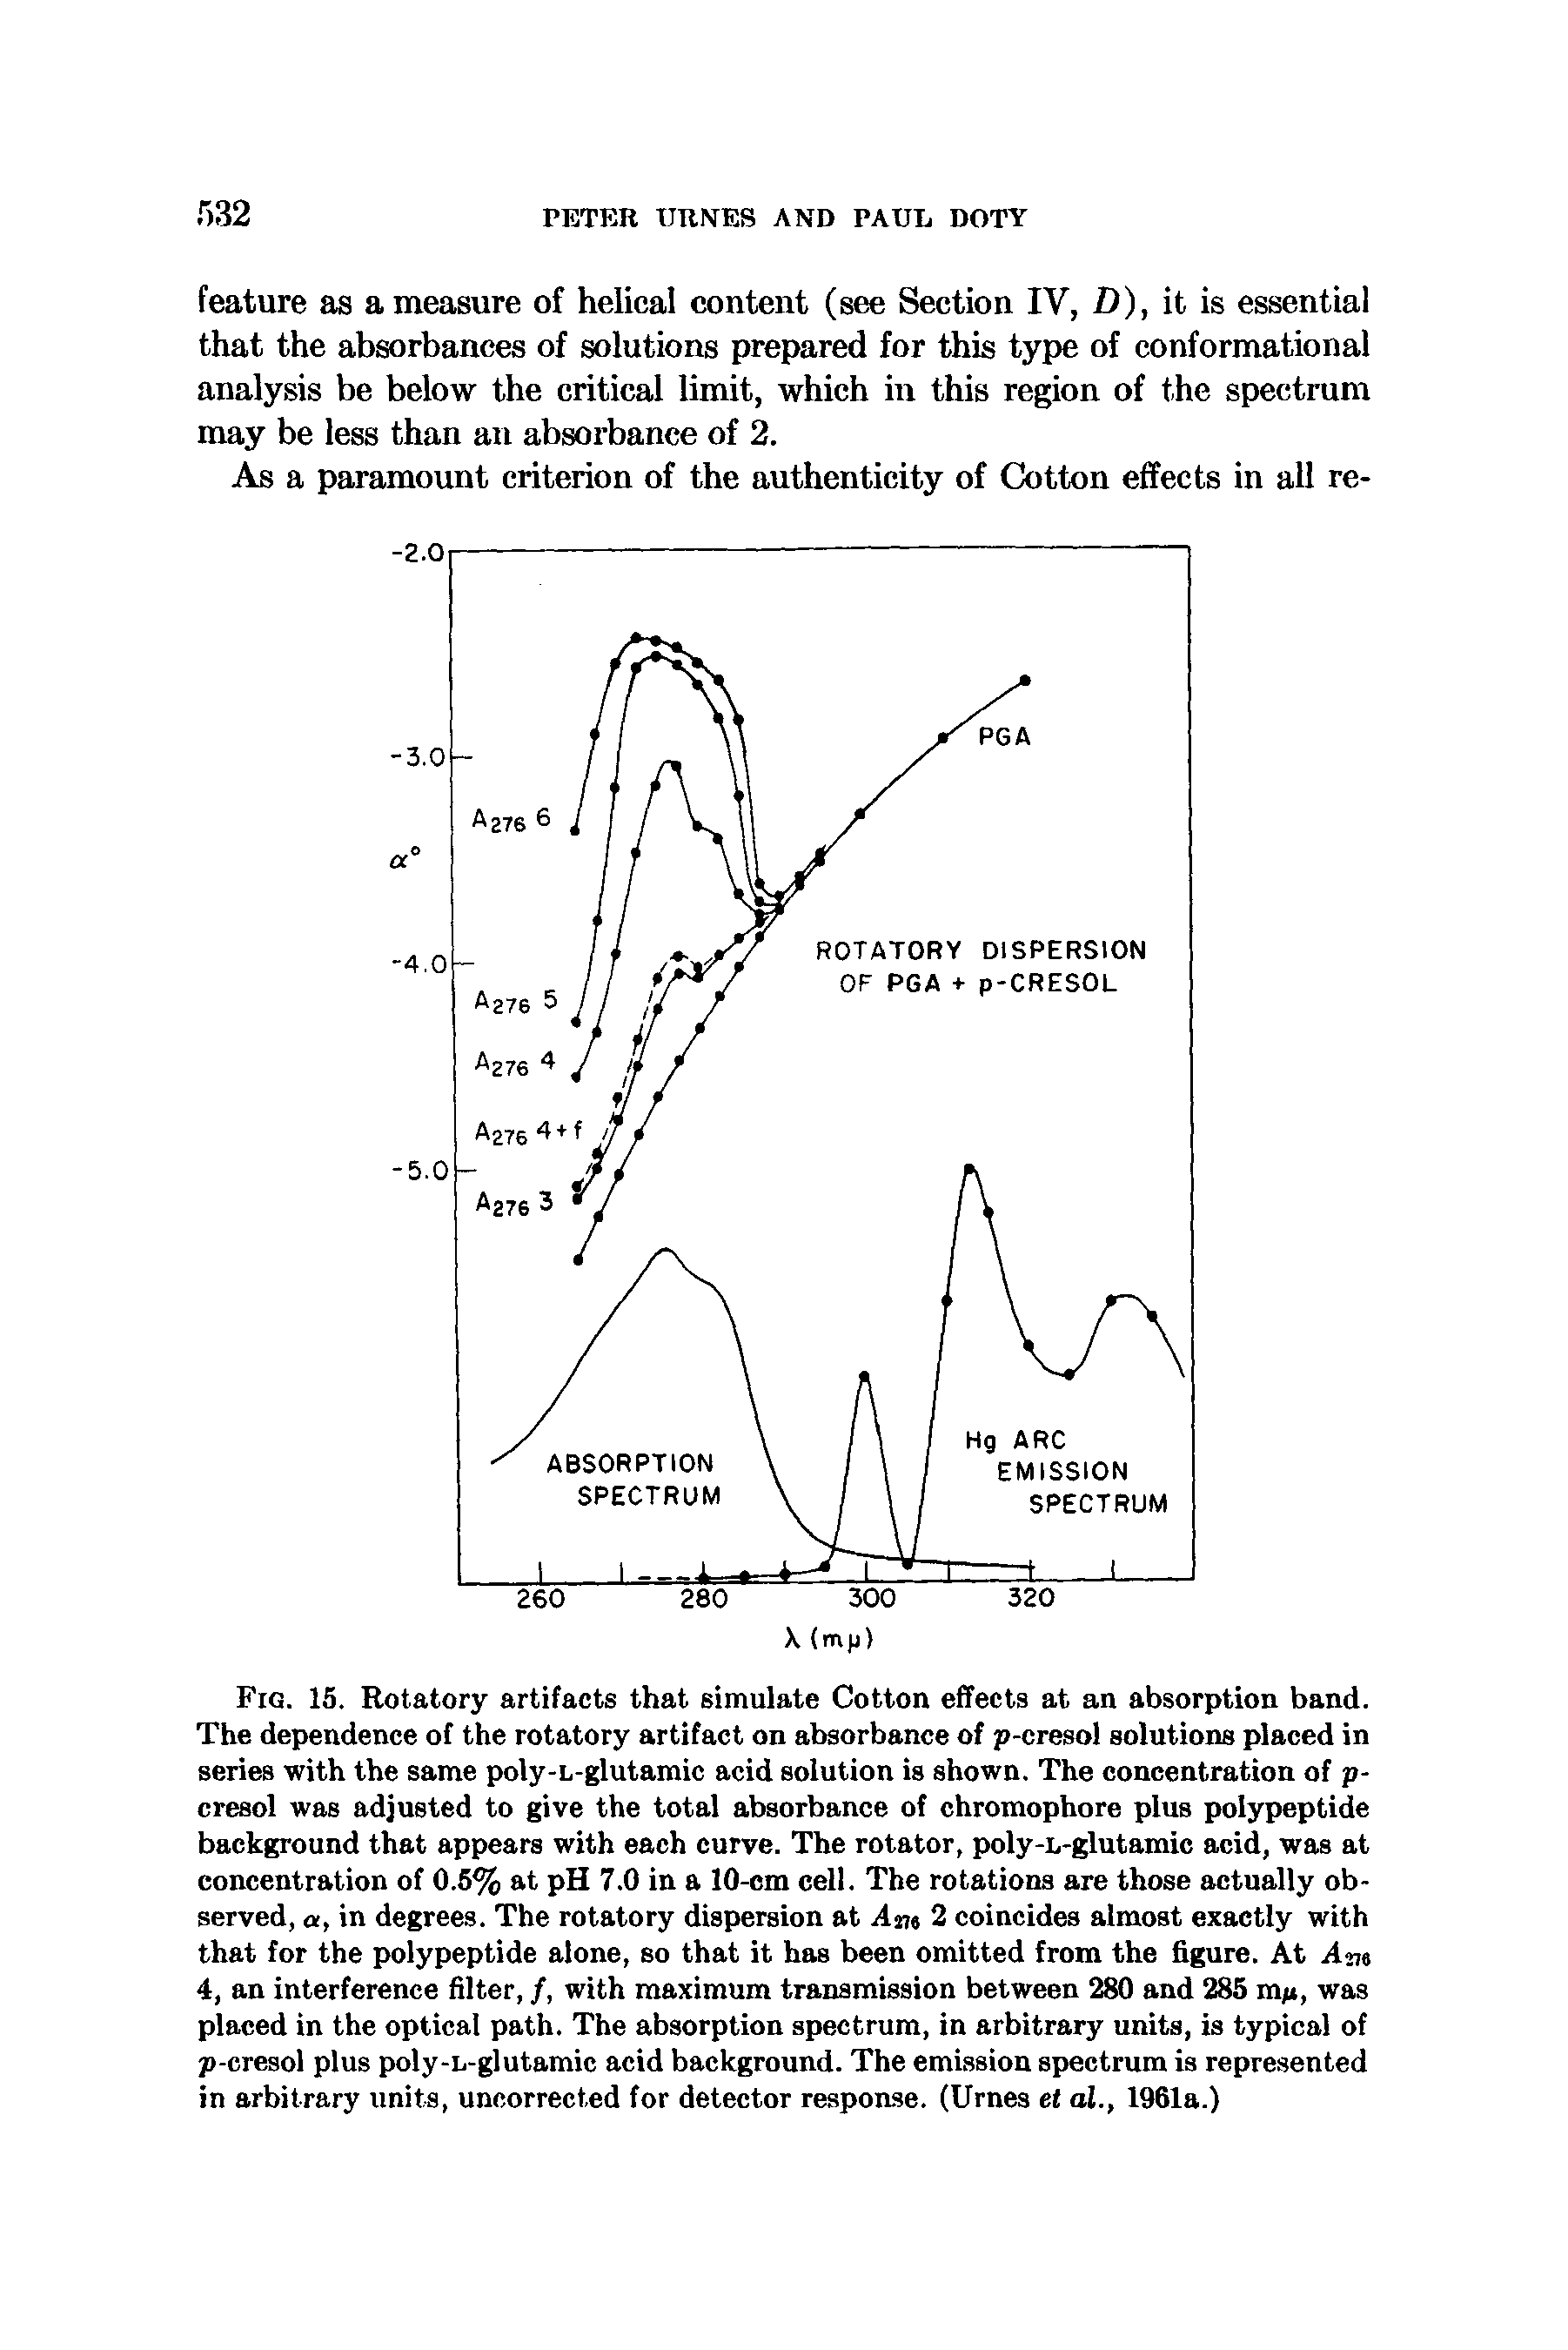 Fig. 15. Rotatory artifacts that simulate Cotton effects at an absorption band. The dependence of the rotatory artifact on absorbance of p-cresol solutions placed in series with the same poly-L-glutamic acid solution is shown. The concentration of p-cresol was adjusted to give the total absorbance of chromophore plus polypeptide background that appears with each curve. The rotator, poly-L-glutamic acid, was at concentration of 0.5% at pH 7.0 in a 10-cm cell. The rotations are those actually observed, a, in degrees. The rotatory dispersion at Am 2 coincides almost exactly with that for the polypeptide alone, so that it has been omitted from the figure. At Am 4, an interference filter, /, with maximum transmission between 280 and 285 m/i, was placed in the optical path. The absorption spectrum, in arbitrary units, is typical of p-cresol plus poly-L-glutamic acid background. The emission spectrum is represented in arbitrary units, uncorrected for detector response. (Urnes et al., 1961a.)...